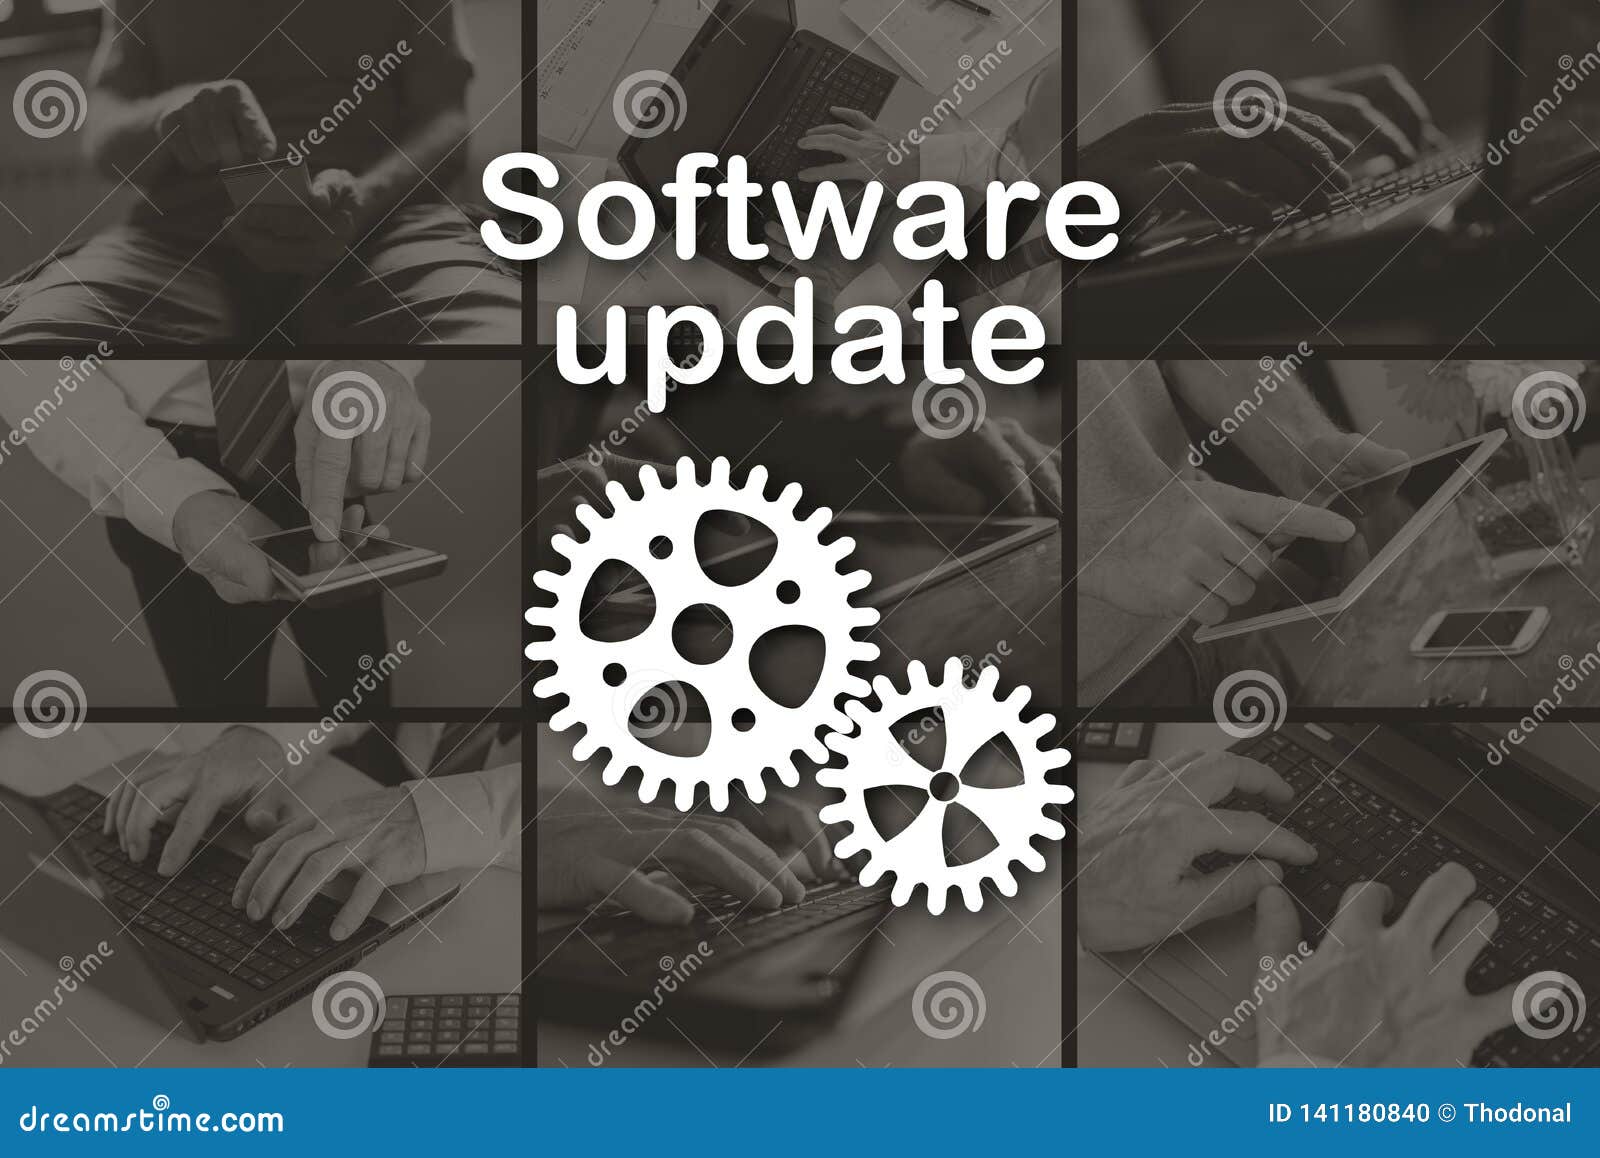 concept of software update